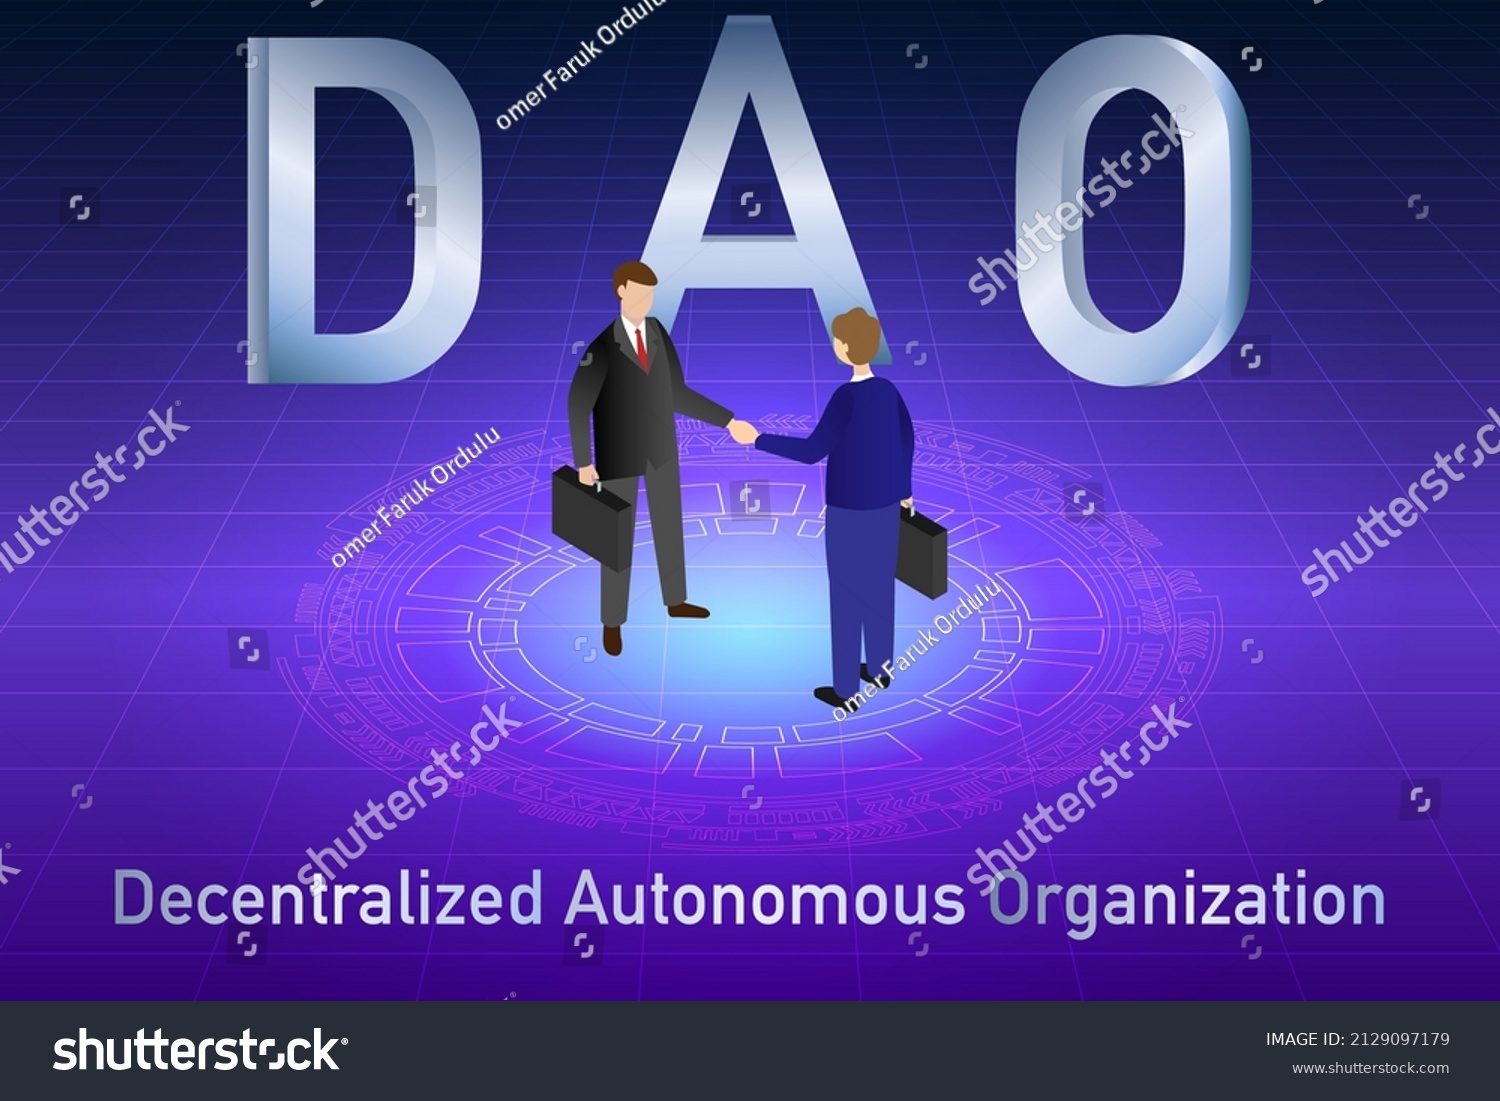 SVG of DAO, Decentralized Autonomous Organization. Business people making agreement in front of DAO logo. Businessmen signing smart contract on blockchain and metaverse. svg